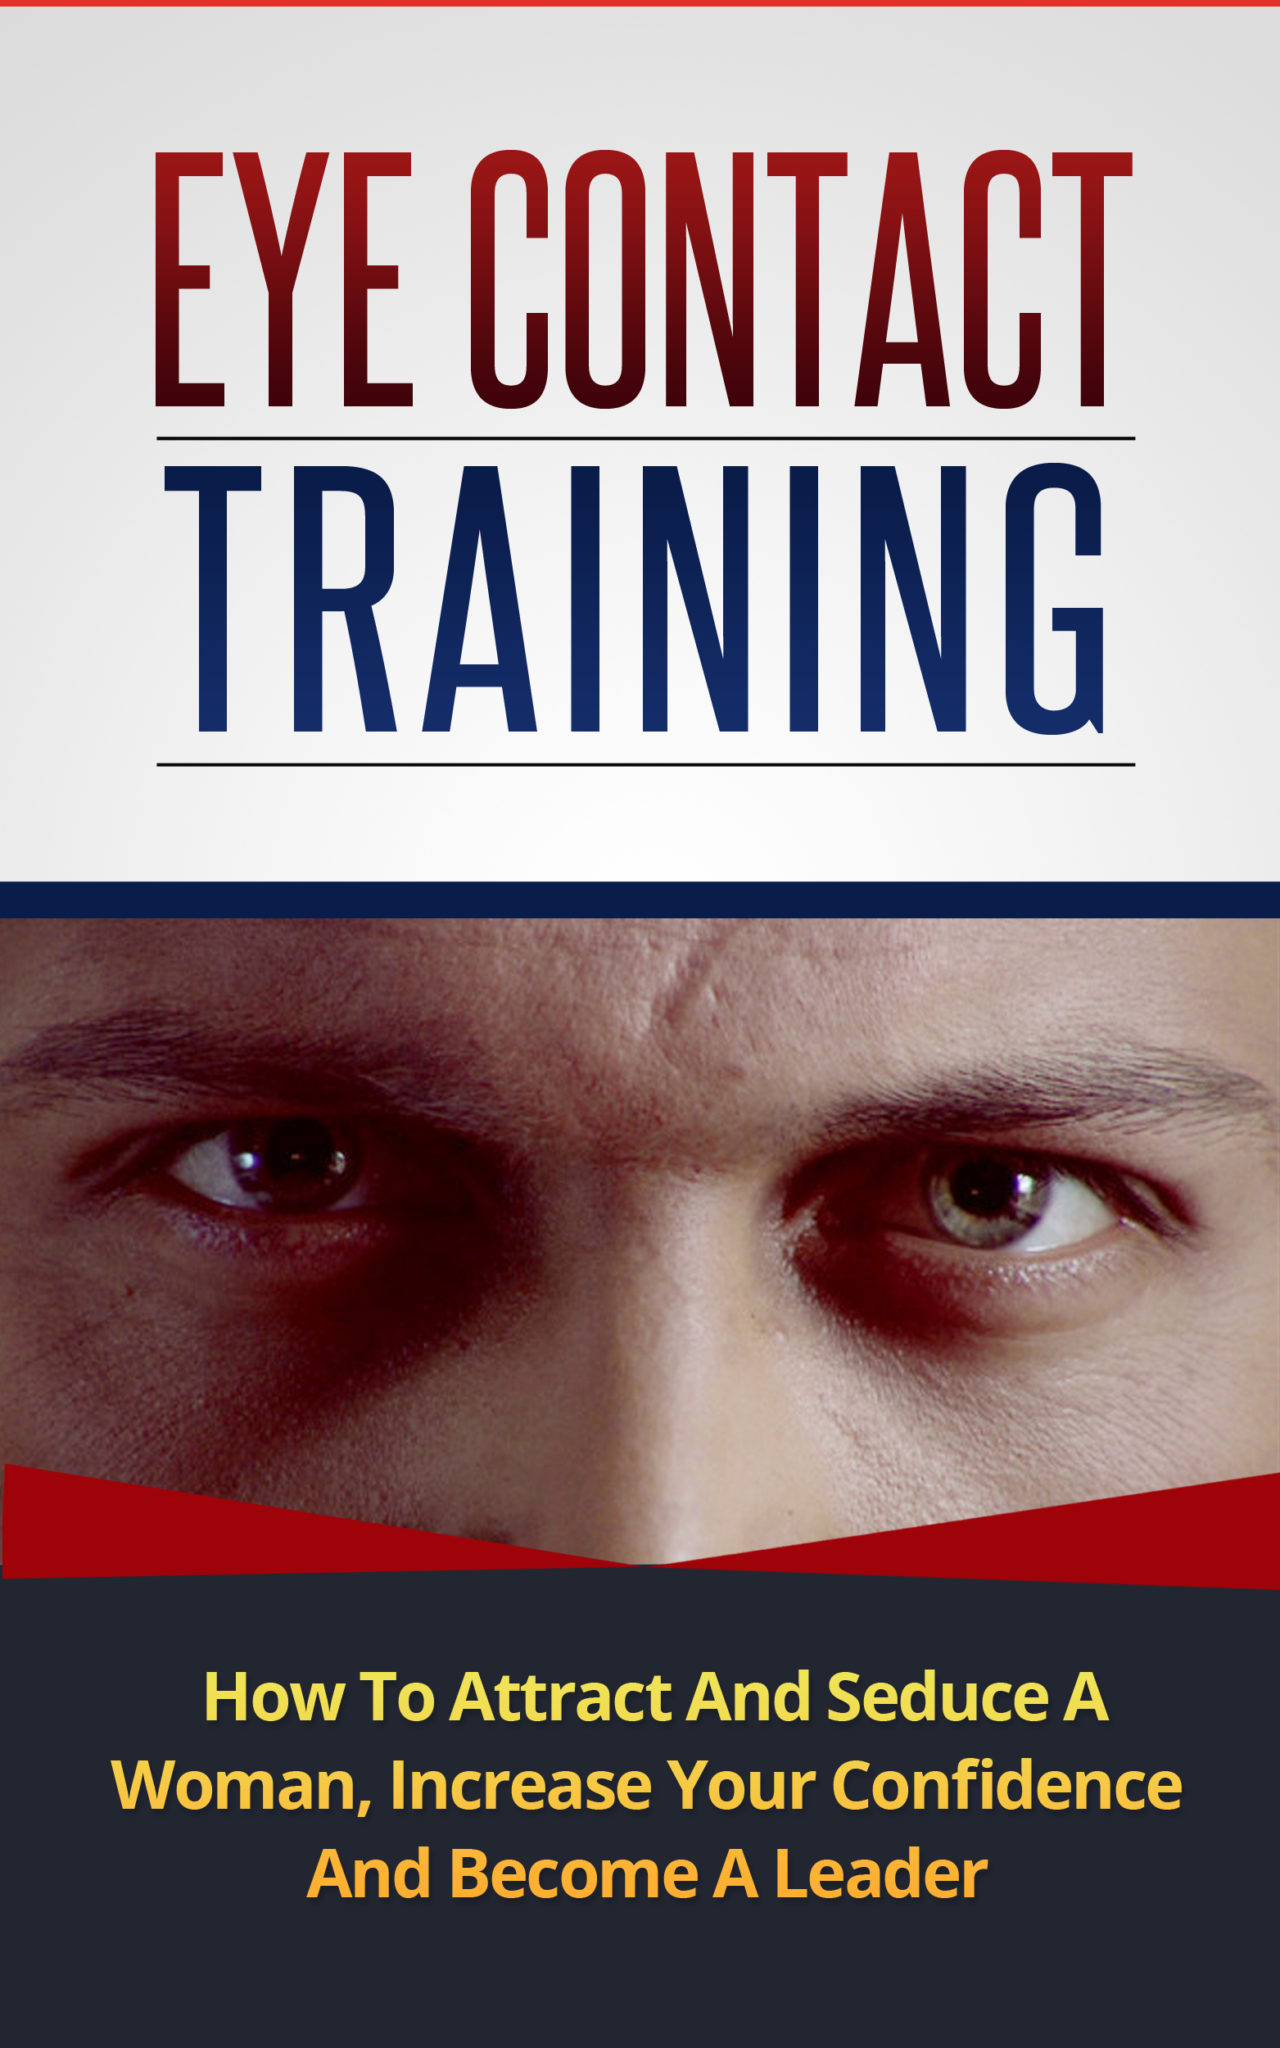 FREE: Eye Contact Training: How To Attract And Seduce A Woman, Increase Your Confidence And Become A Leader (With Focus Exercises) by Robert Moore